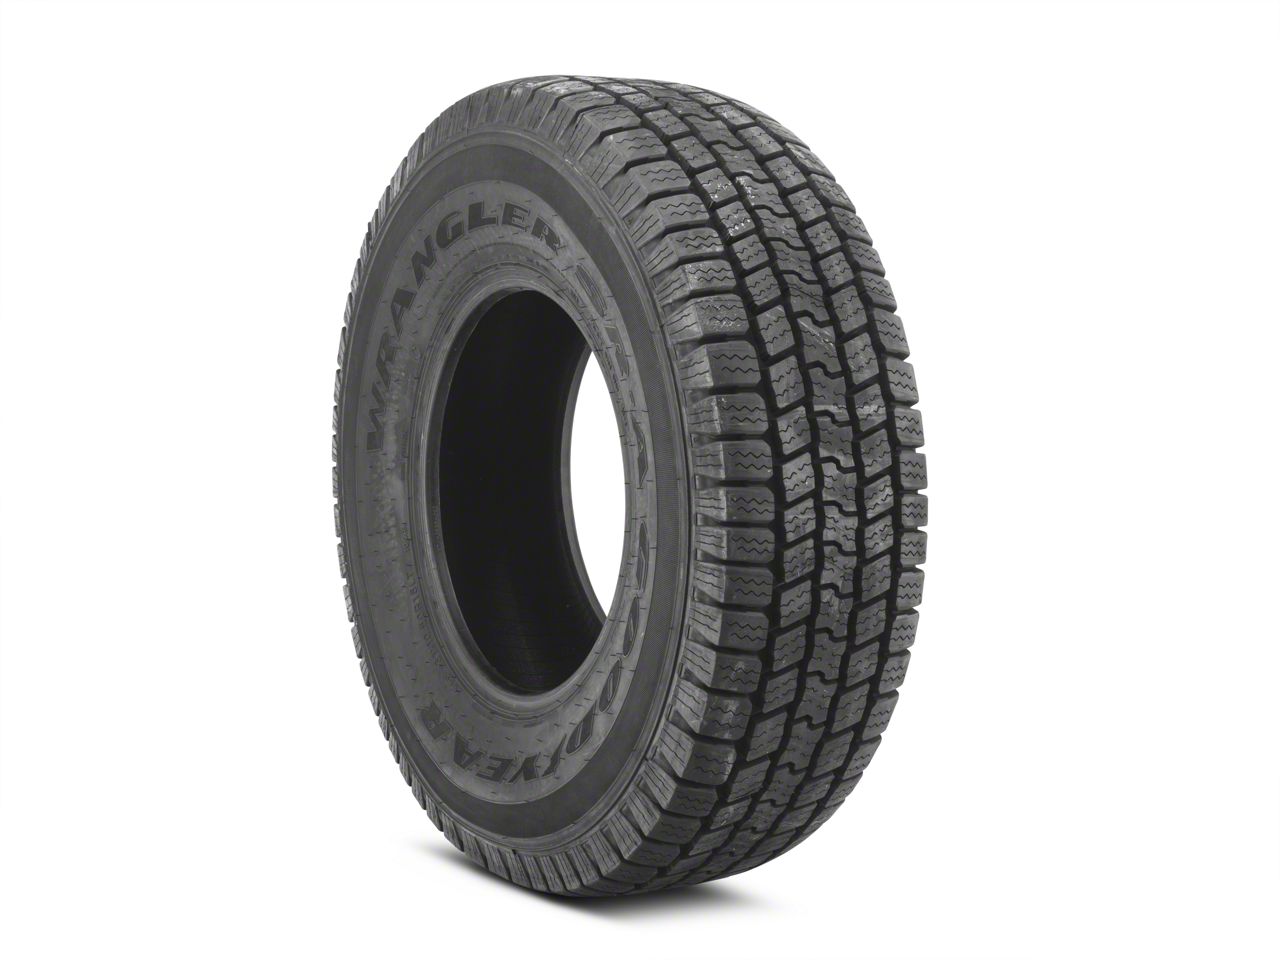 Goodyear Wrangler Tires Life Expectancy Online, SAVE 42% 